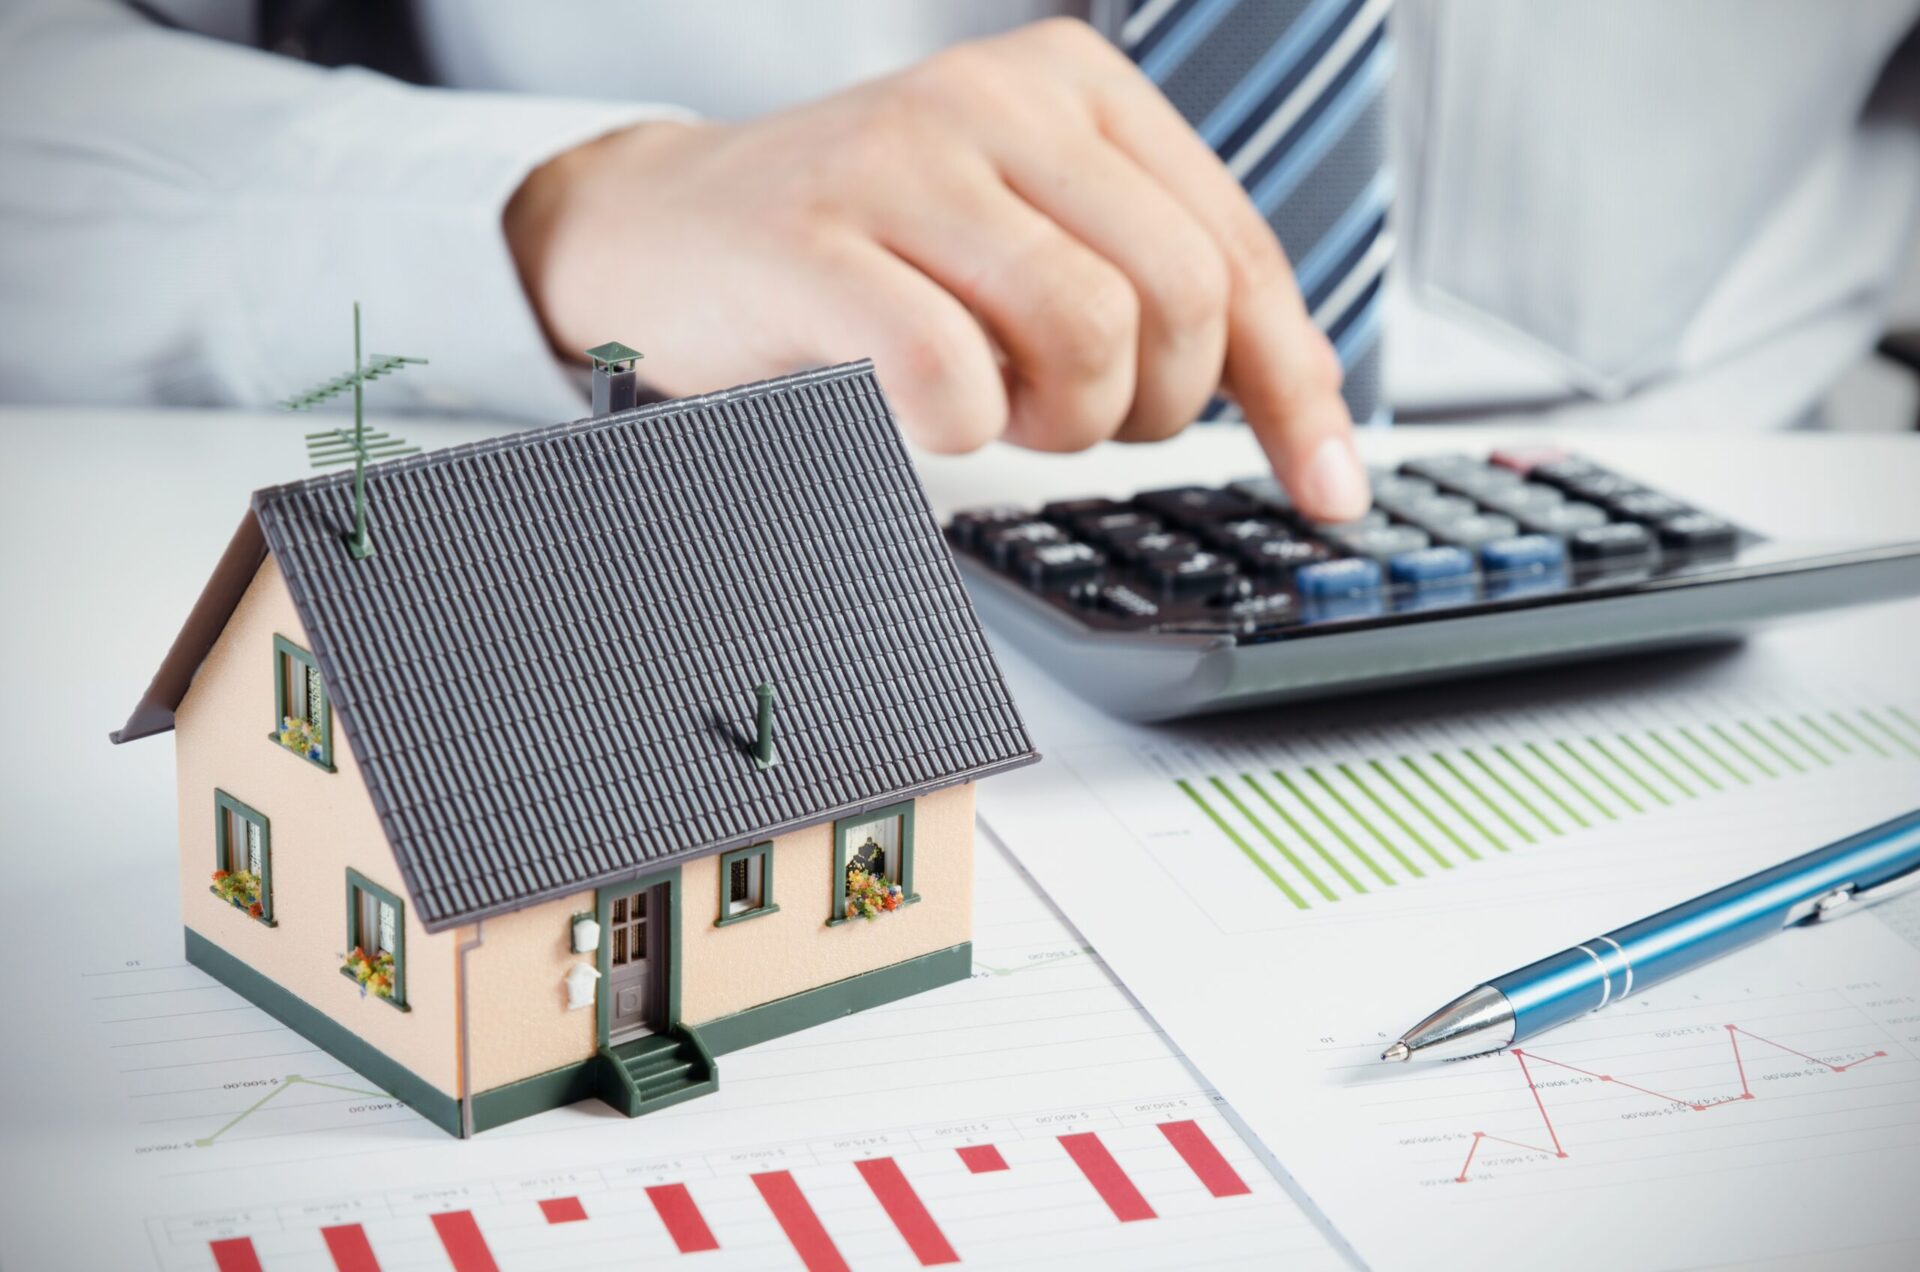 Businessman Calculate The Cost Of Building And Maintaining Home